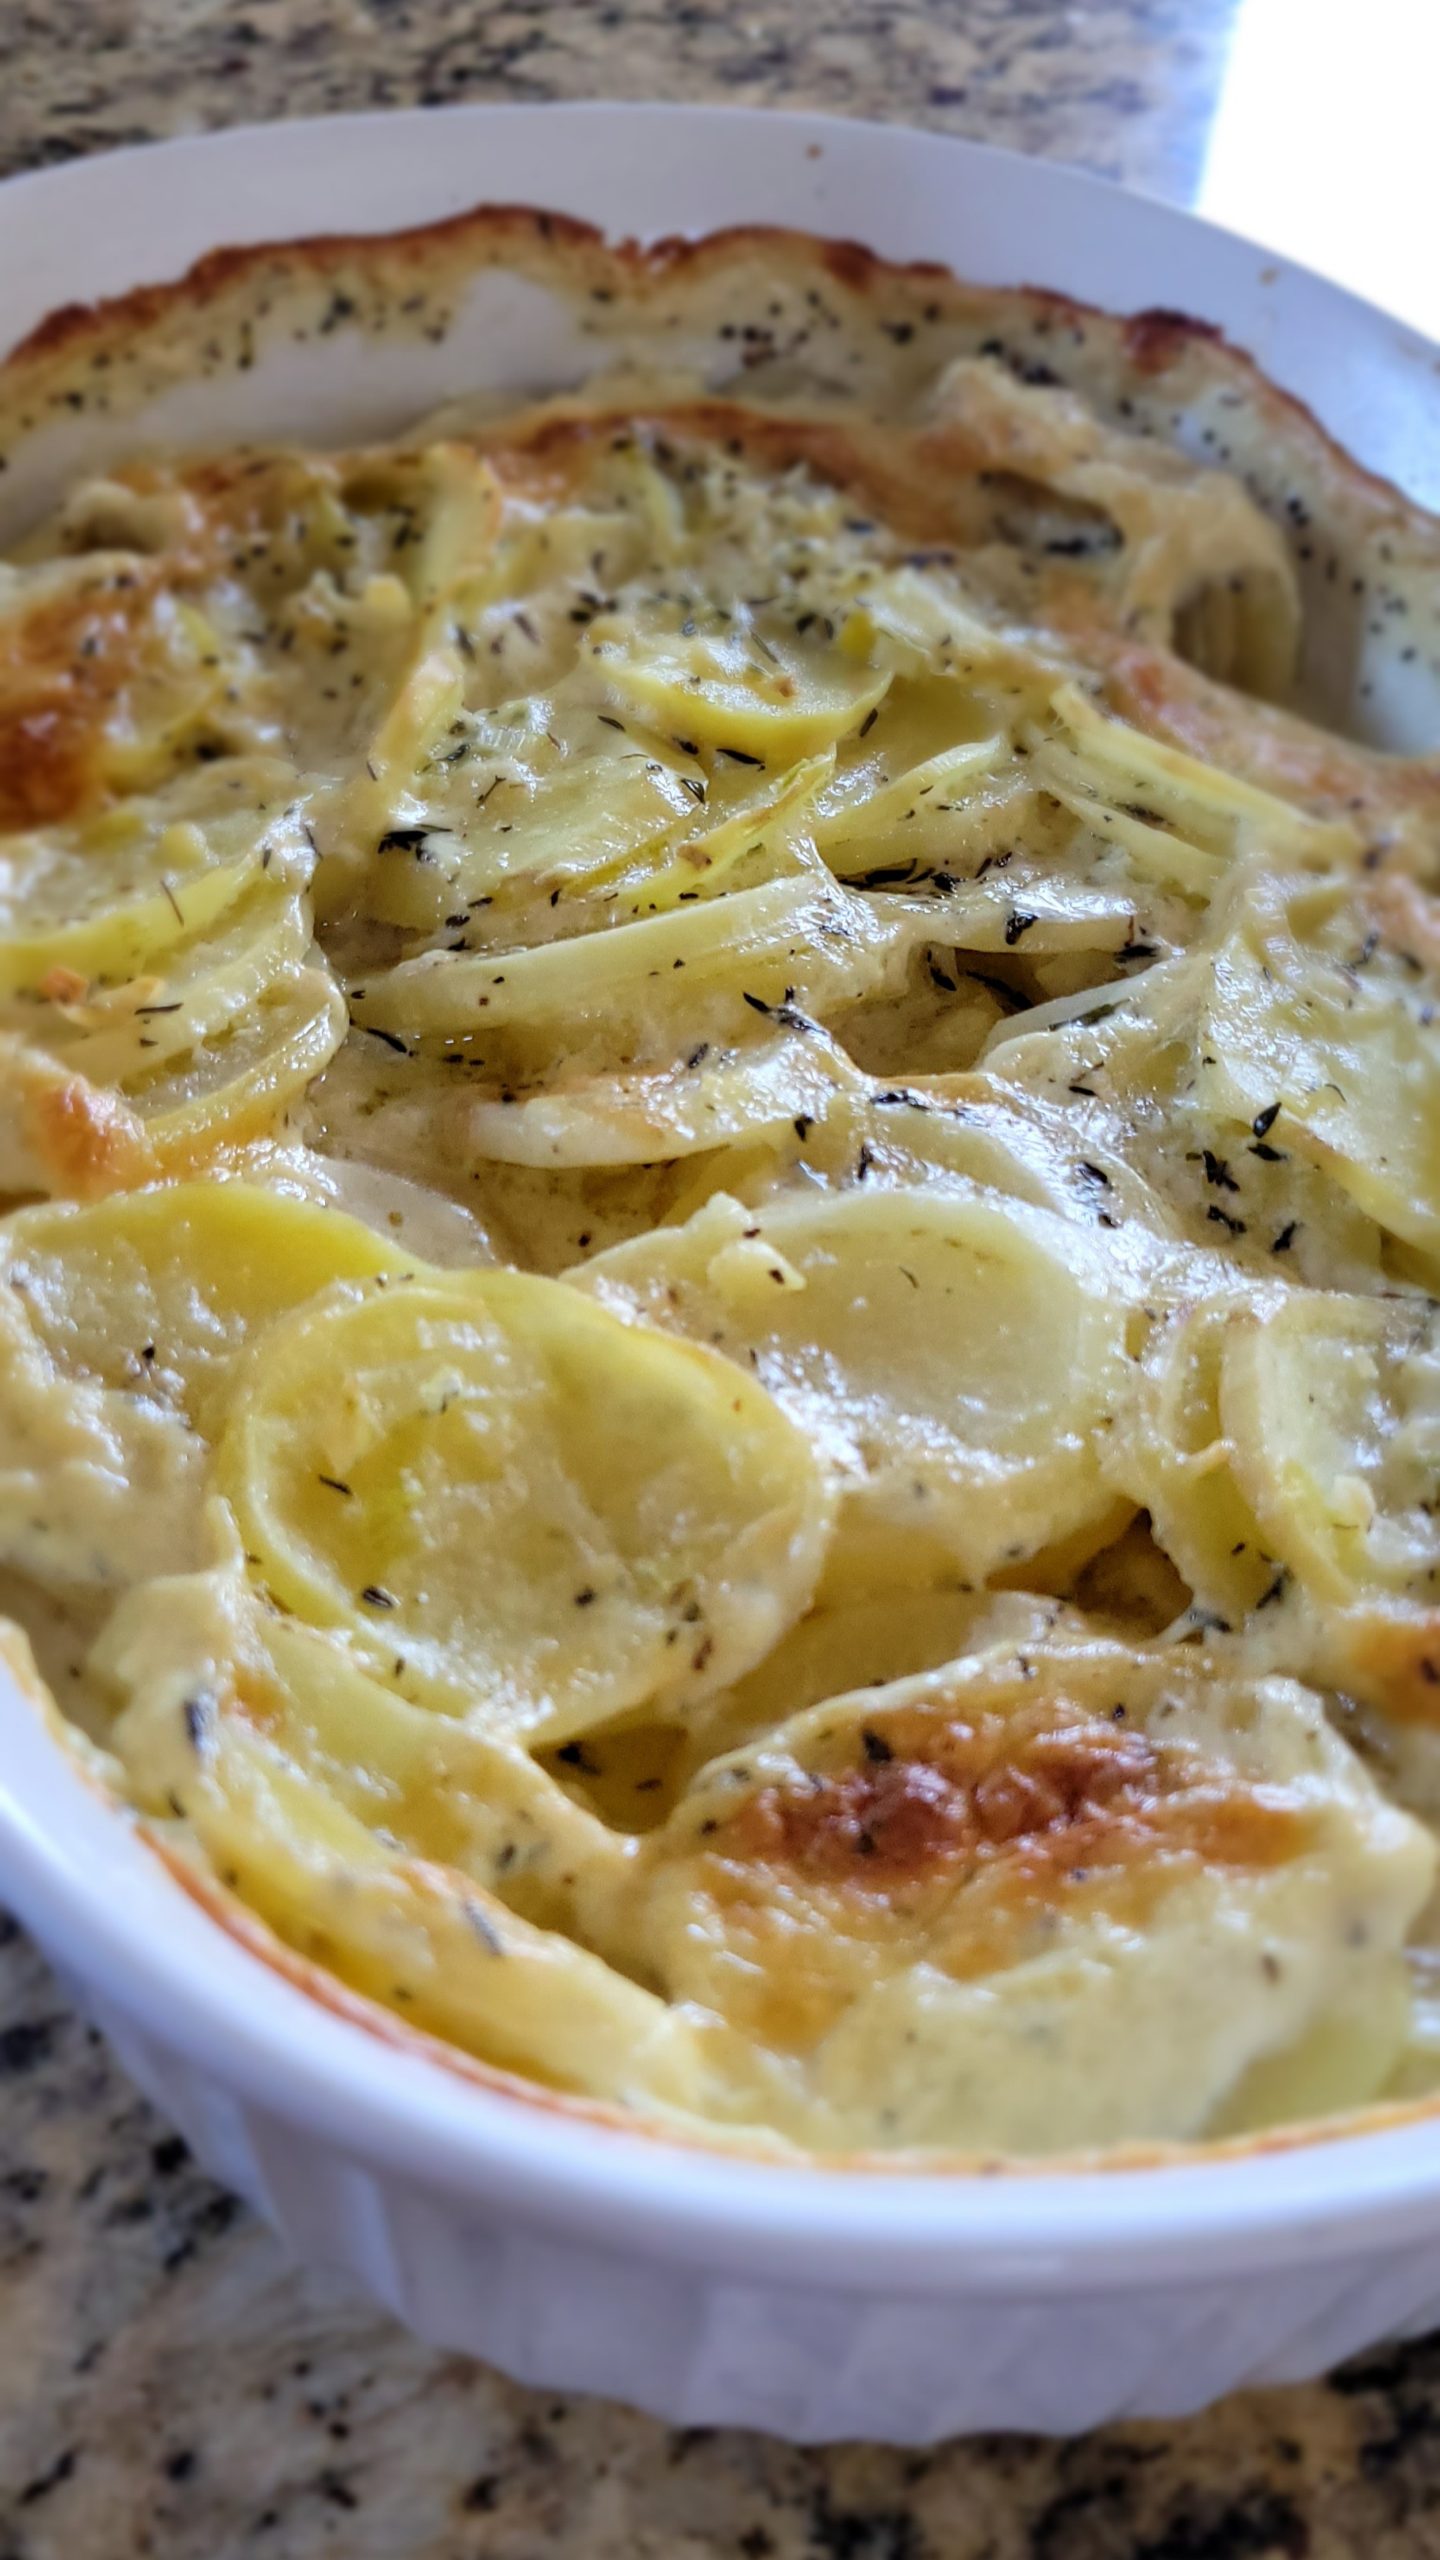 Scalloped potatoes with leeks and thyme